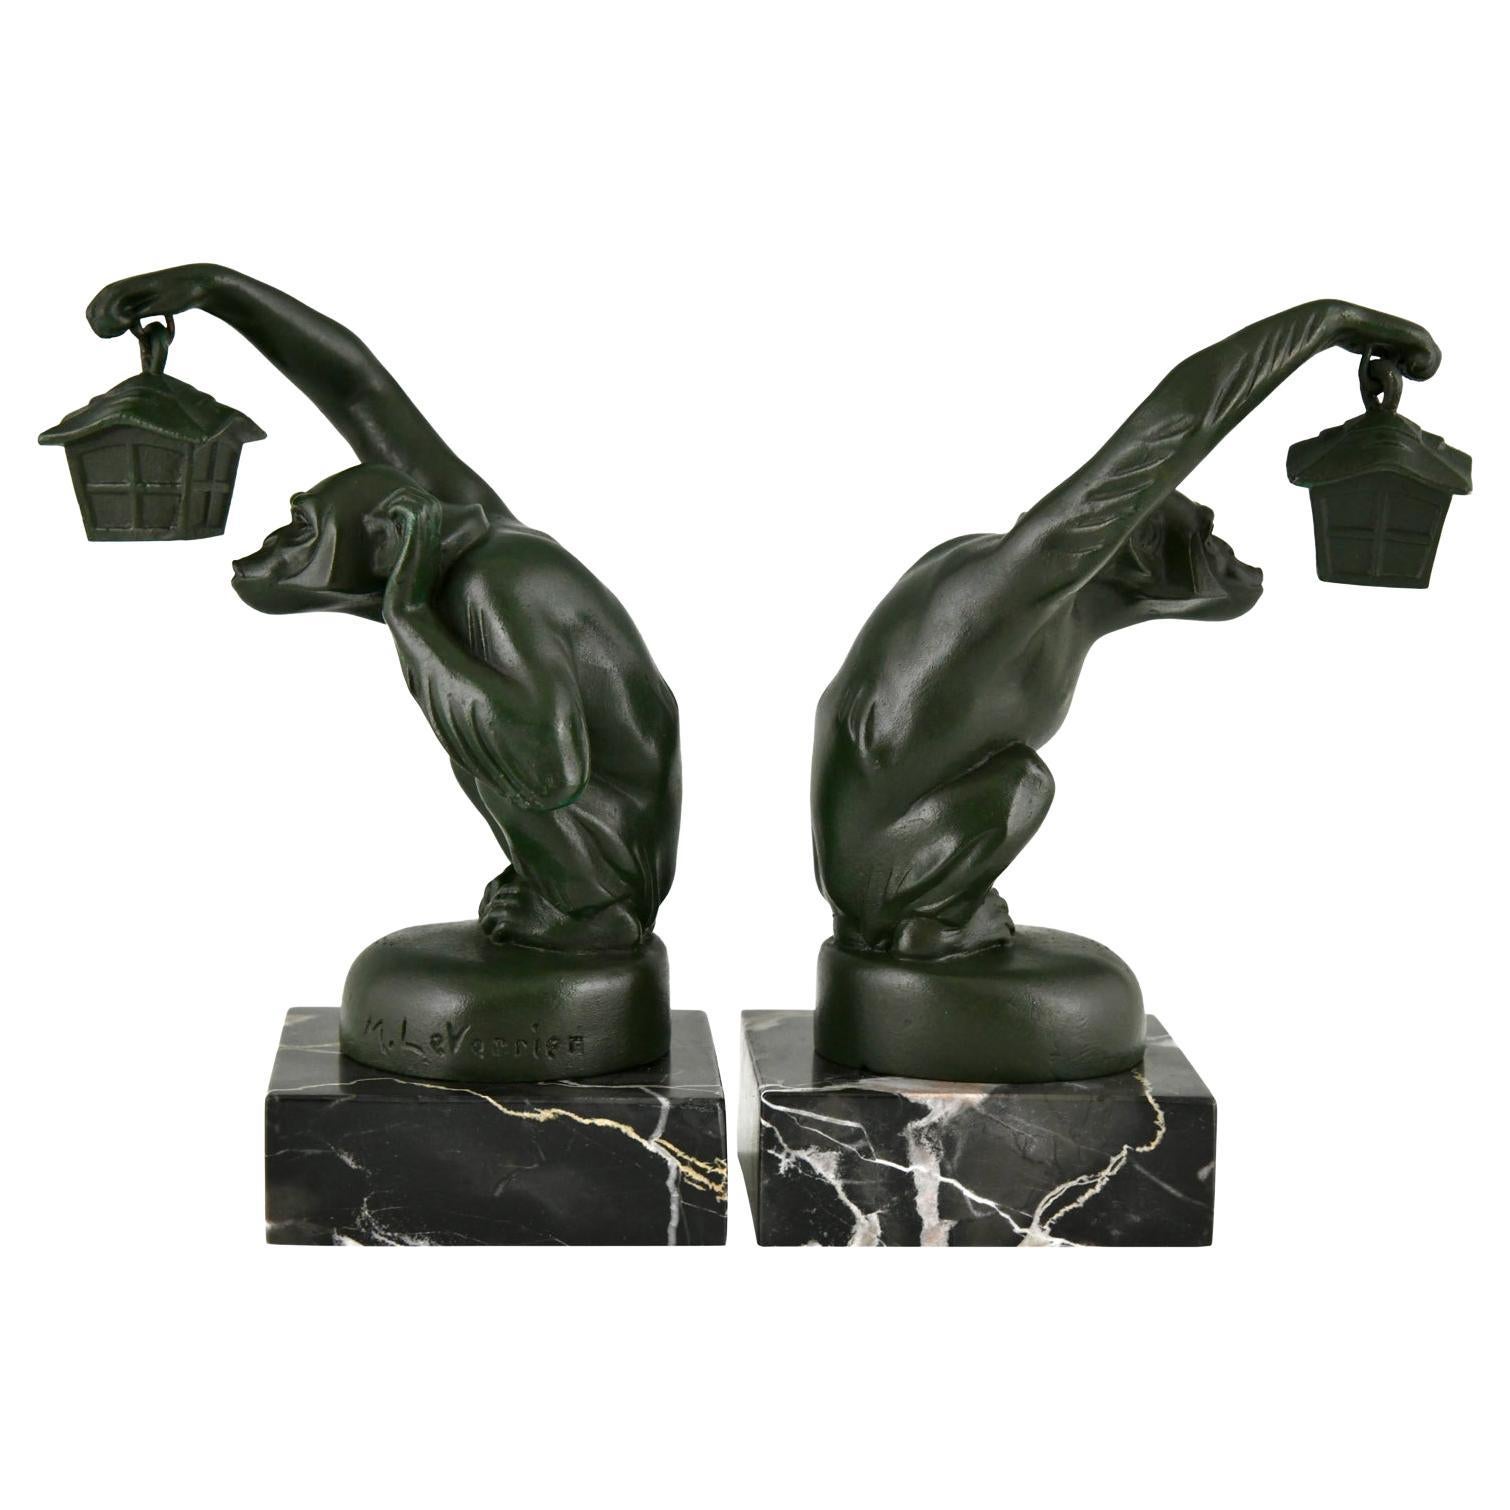 Art Deco Bookends Monkey with Lantern by Max Le Verrier 1925 For Sale